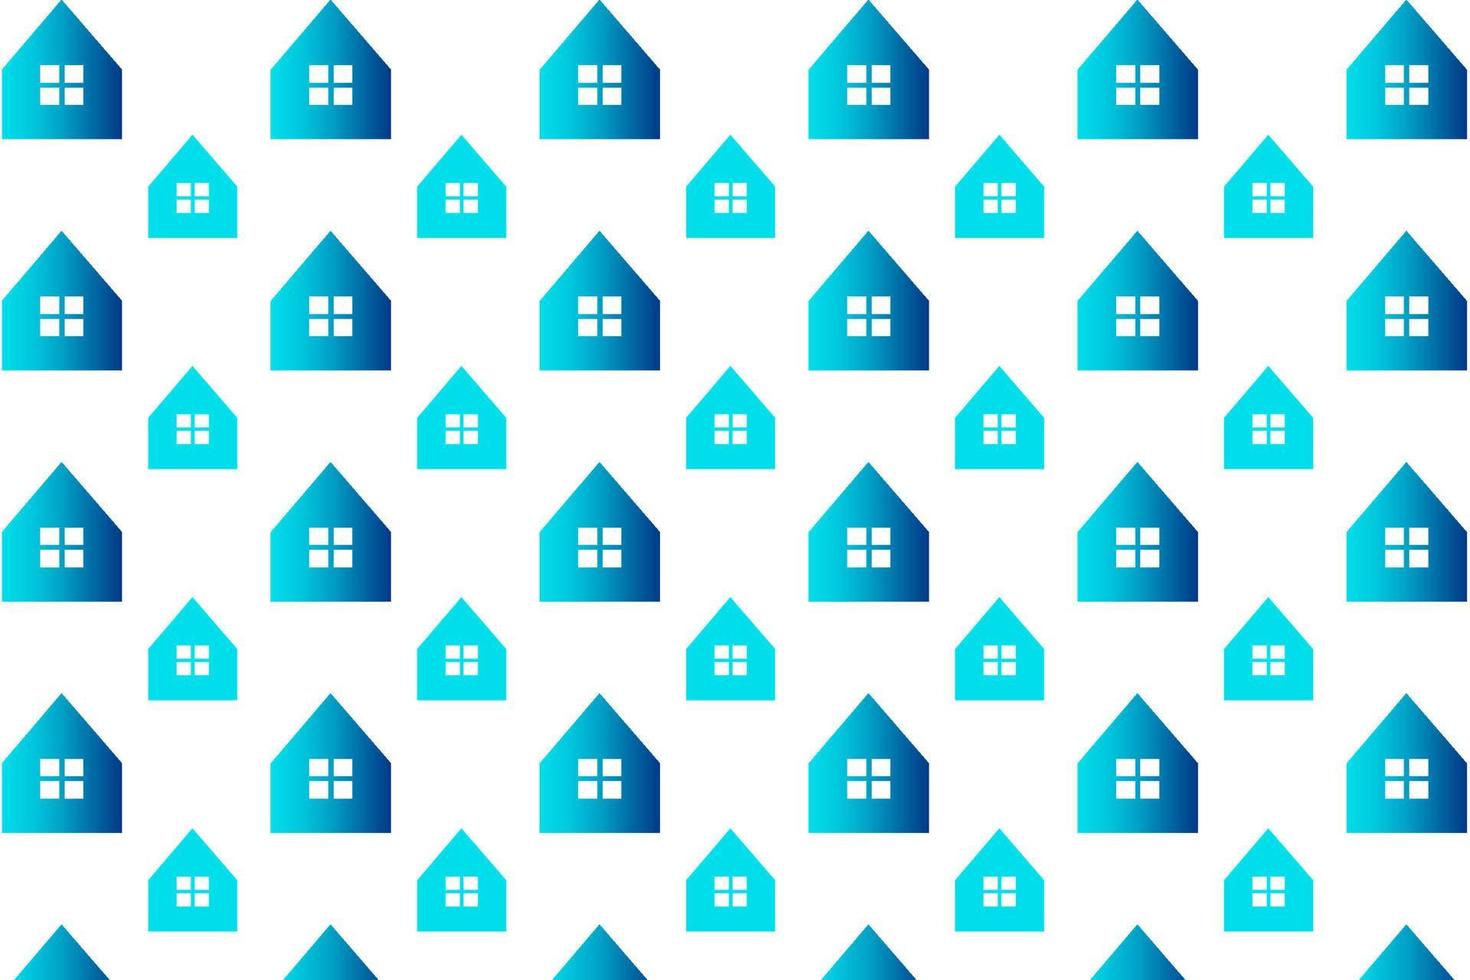 Abstract Residential Pattern Background vector